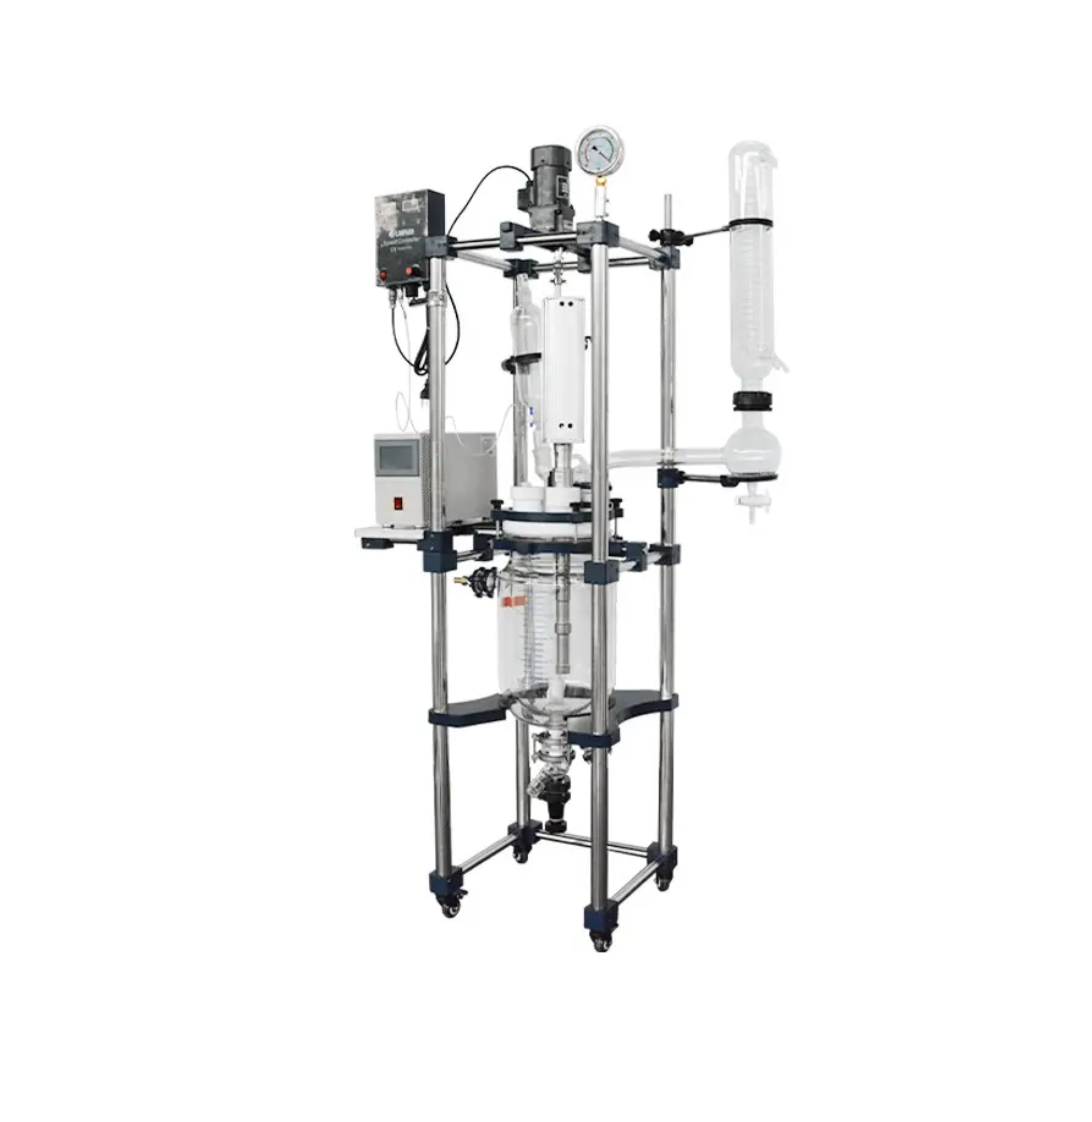 Explosion proof double layer jacketed glass reactor 